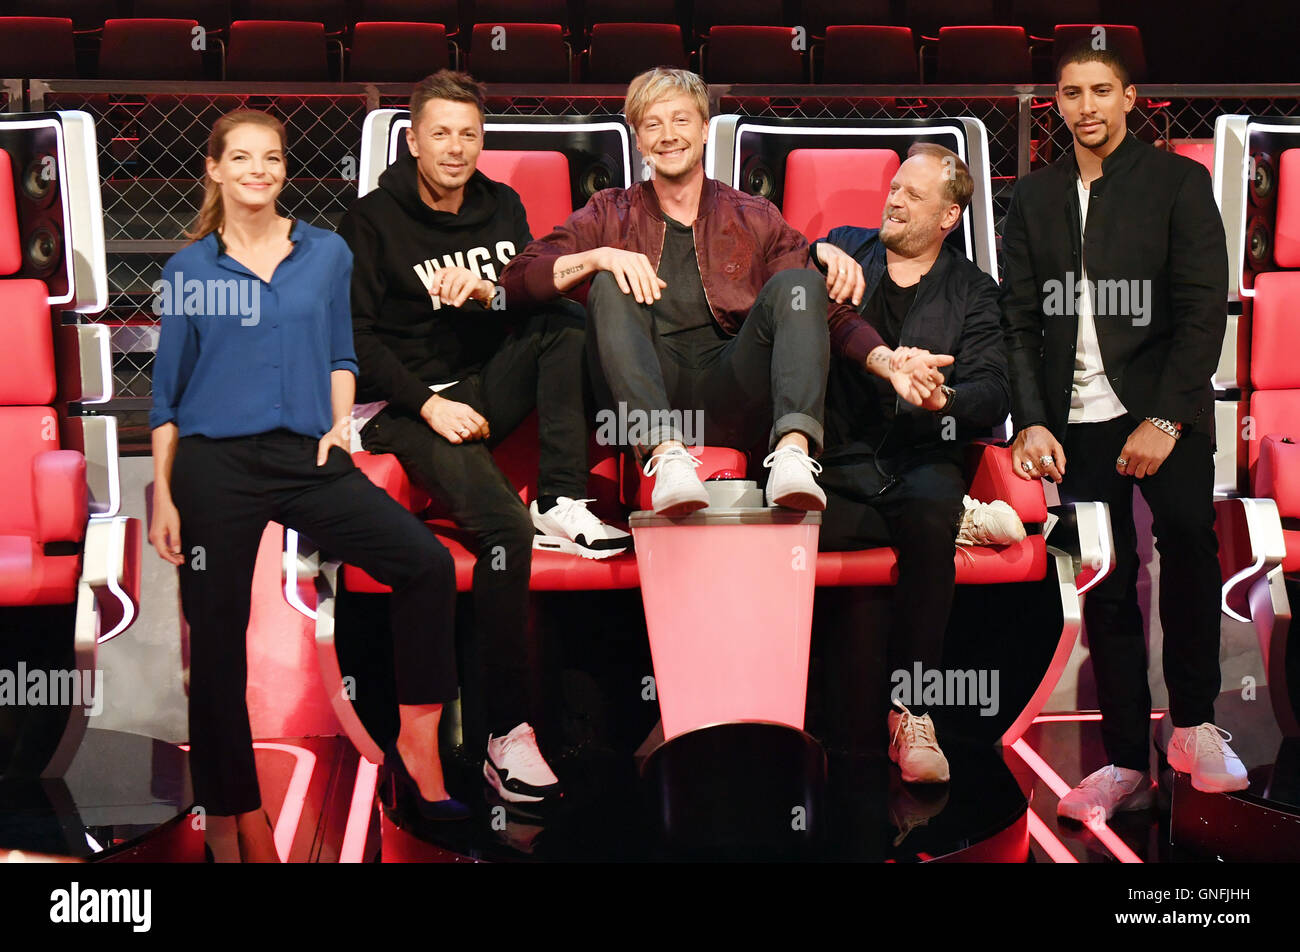 Berlin, Germany. 31st Aug, 2016. The jury for the 6th season of the music show The Voice of Germany - Yvonne Catterfeld (l-r), Michi Beck, Samu Haber, Smudo and Andreas Bourani pose during a press event at the Studio Berlin Adlershof in Berlin, Germany, 31 August 2016. PHOTO: JENS KALAENE/DPA/Alamy Live News Stock Photo